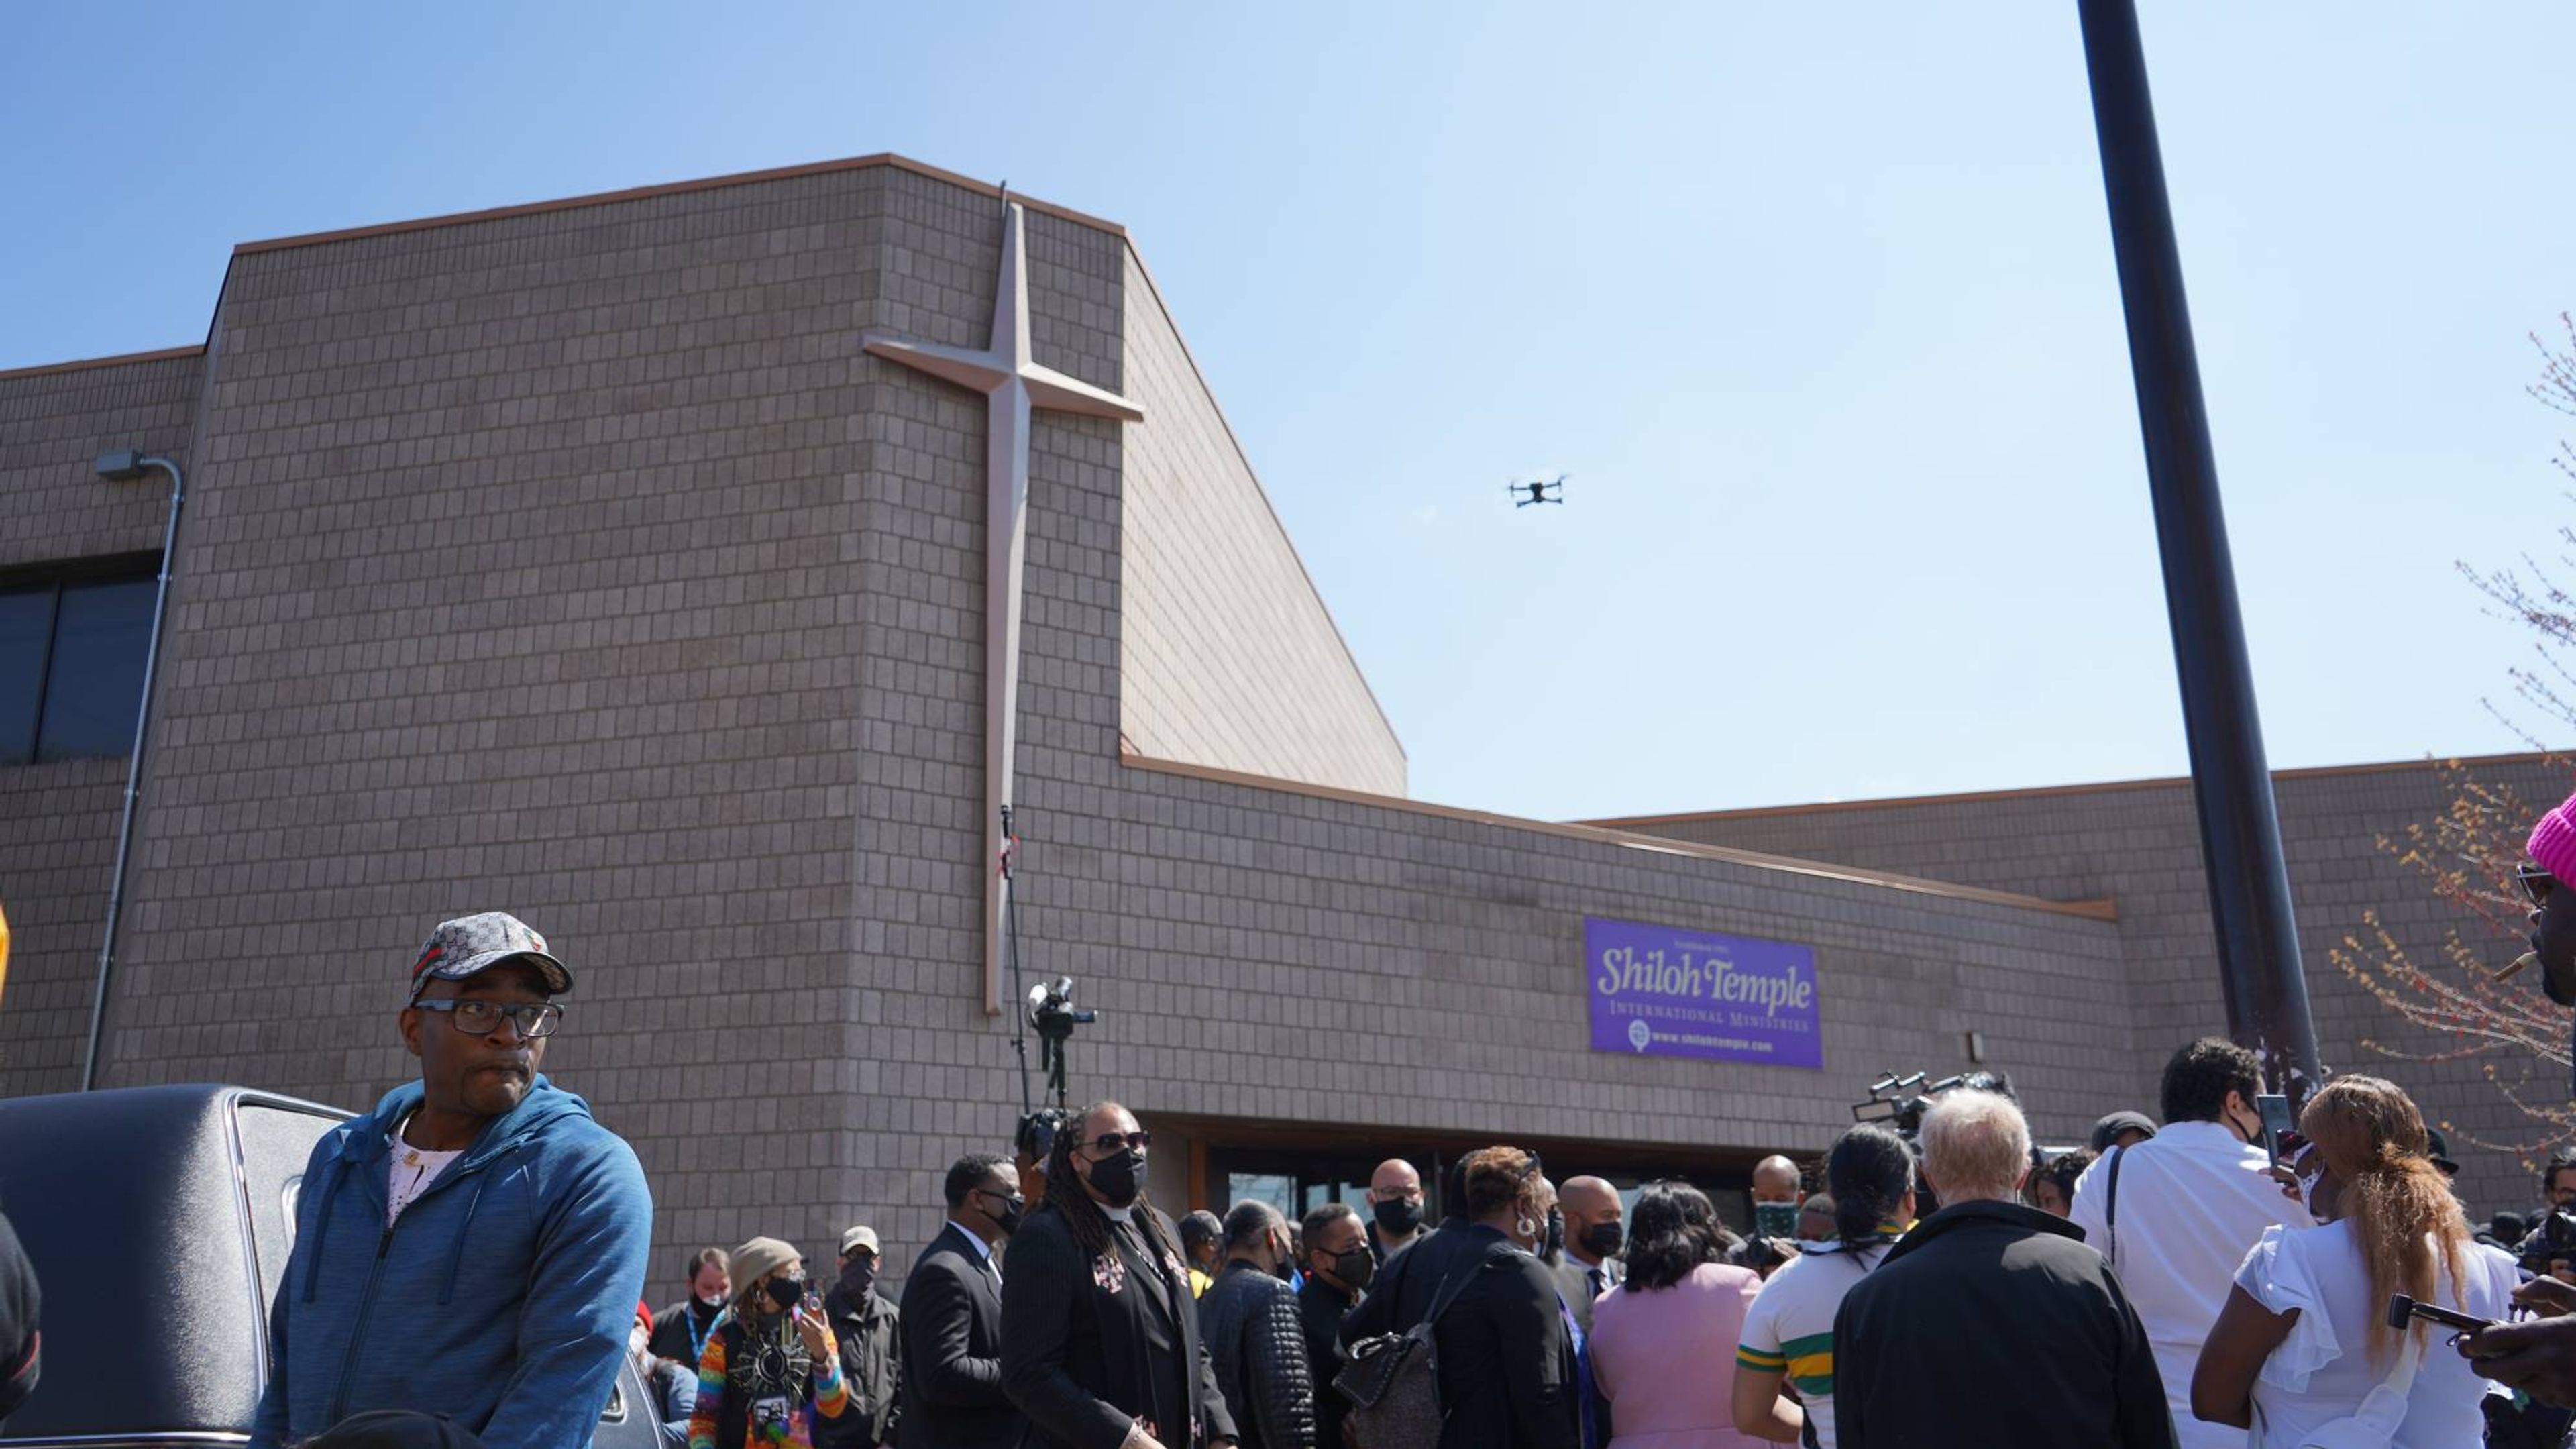 Drones, cameras, audio recorders and more surround the entrance of Shiloh Temple International Ministries.